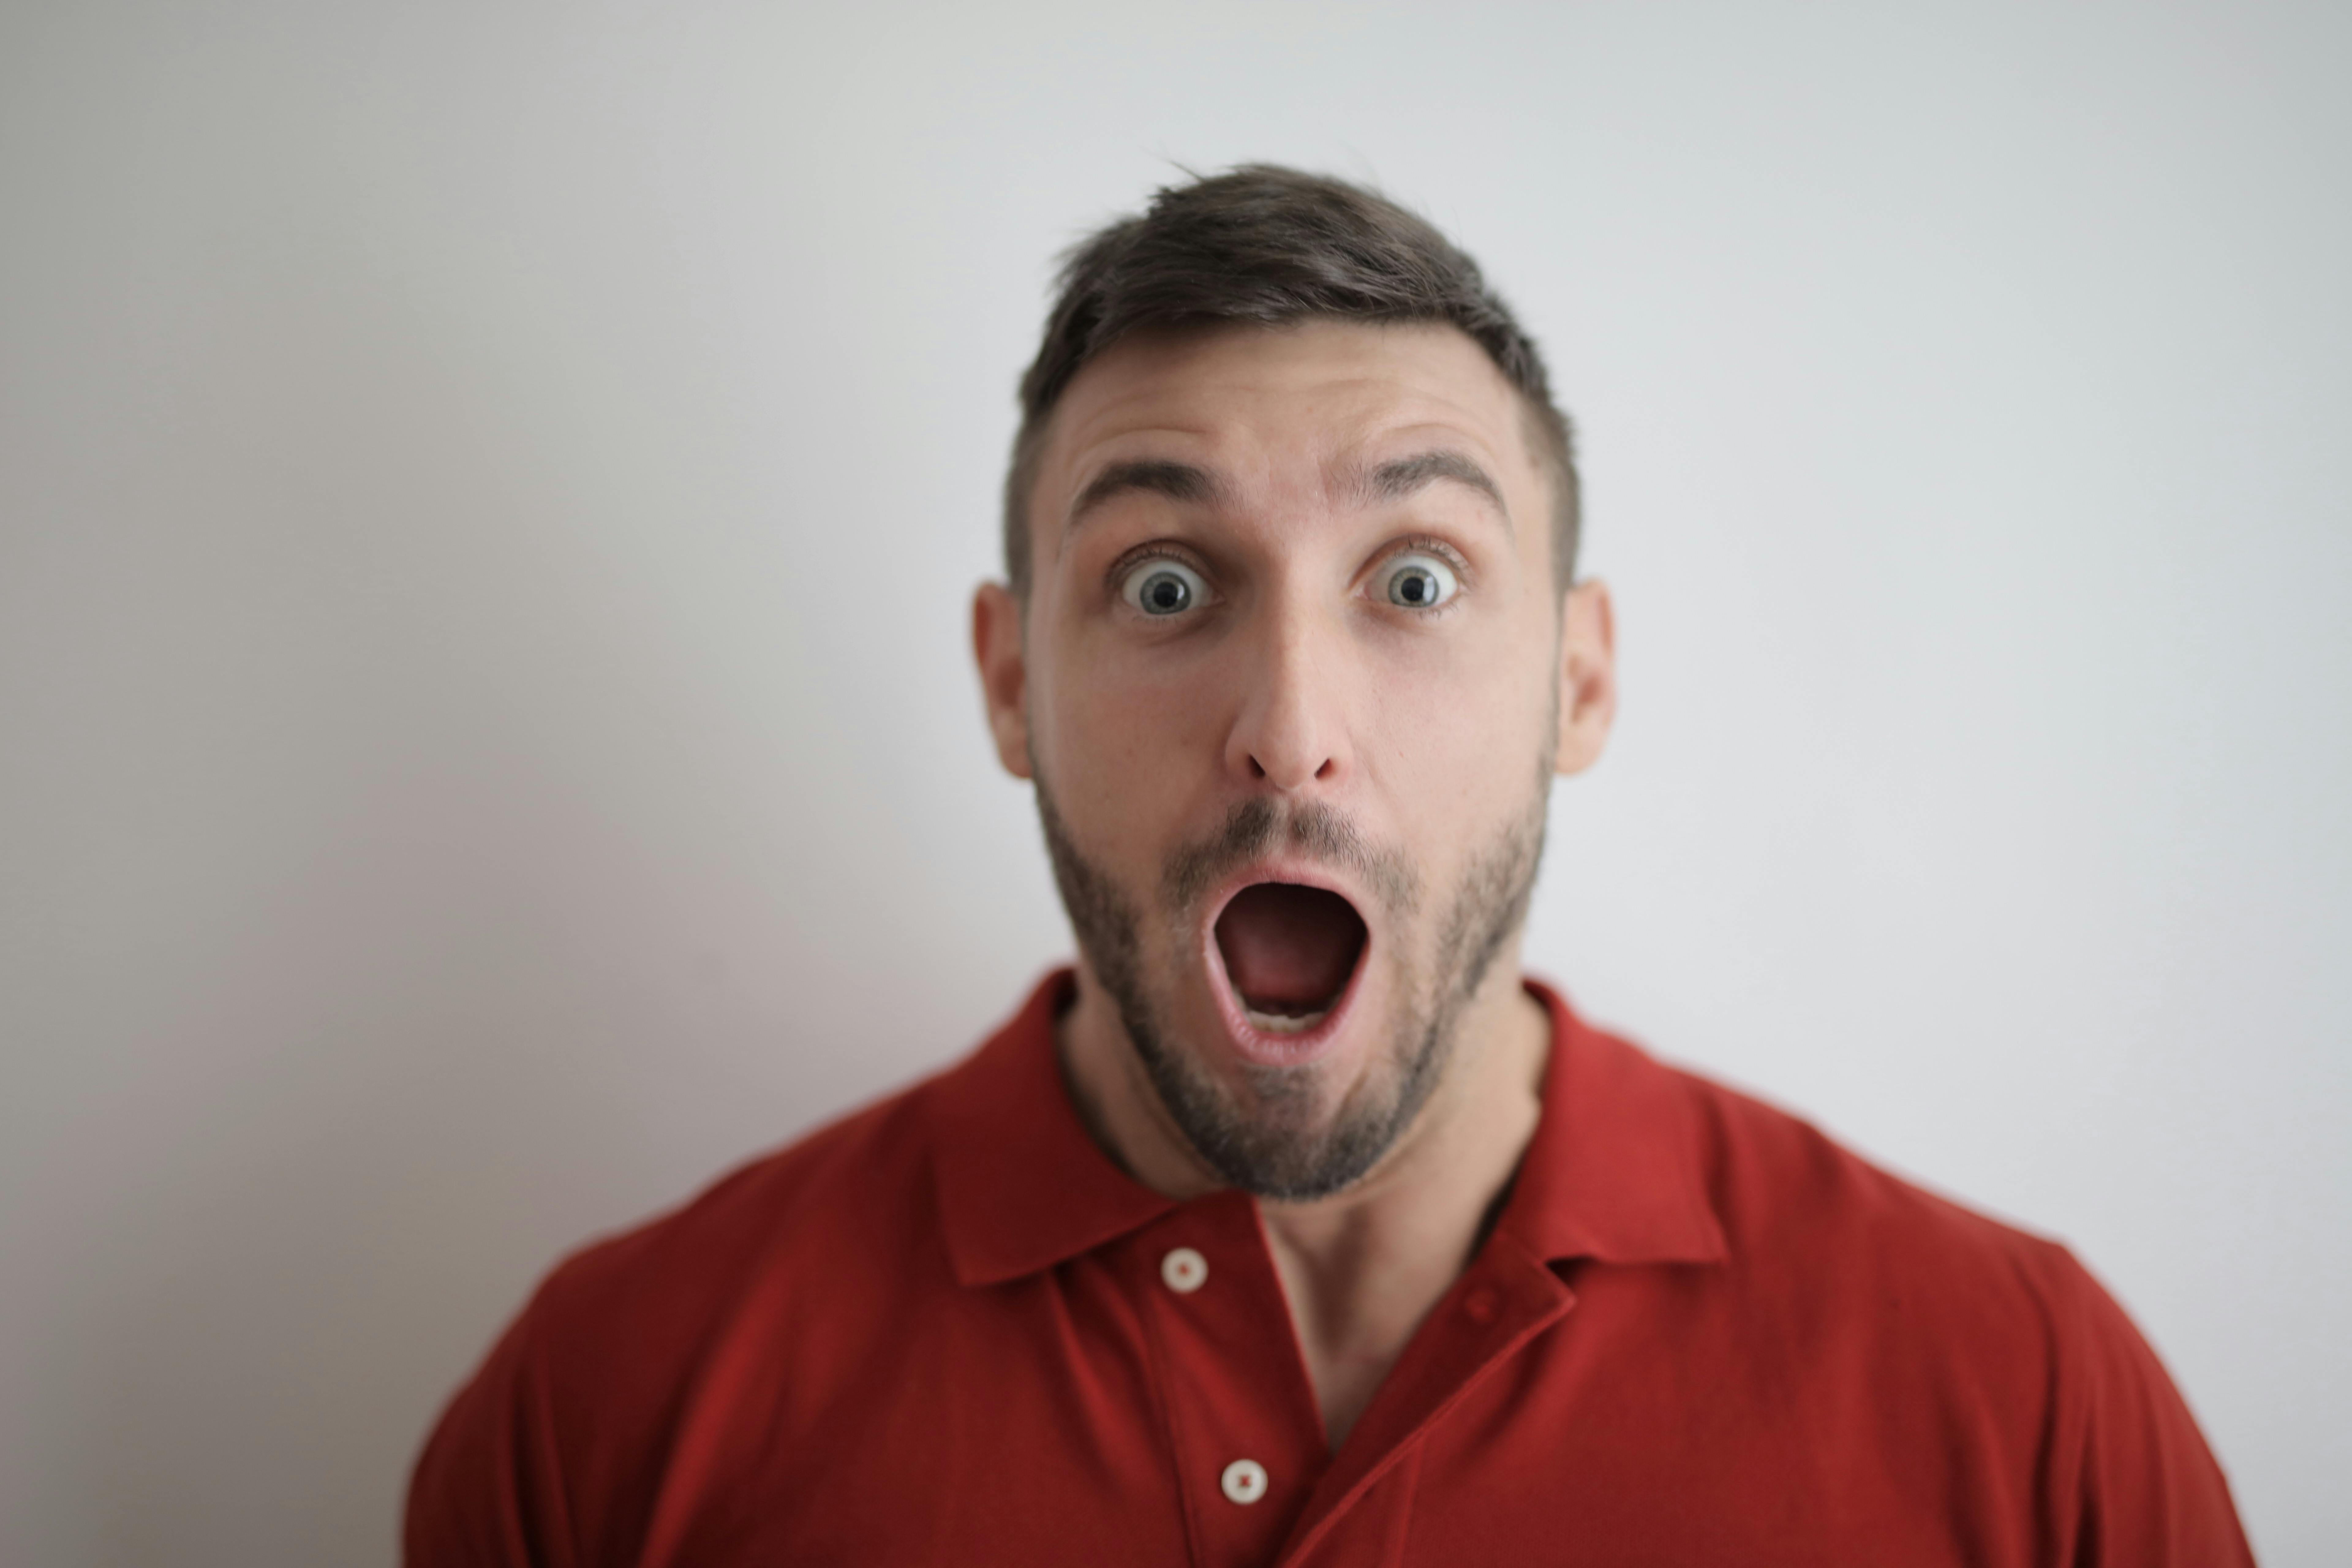 Shocked face of a man in red button up shirt. | Photo: Pexels